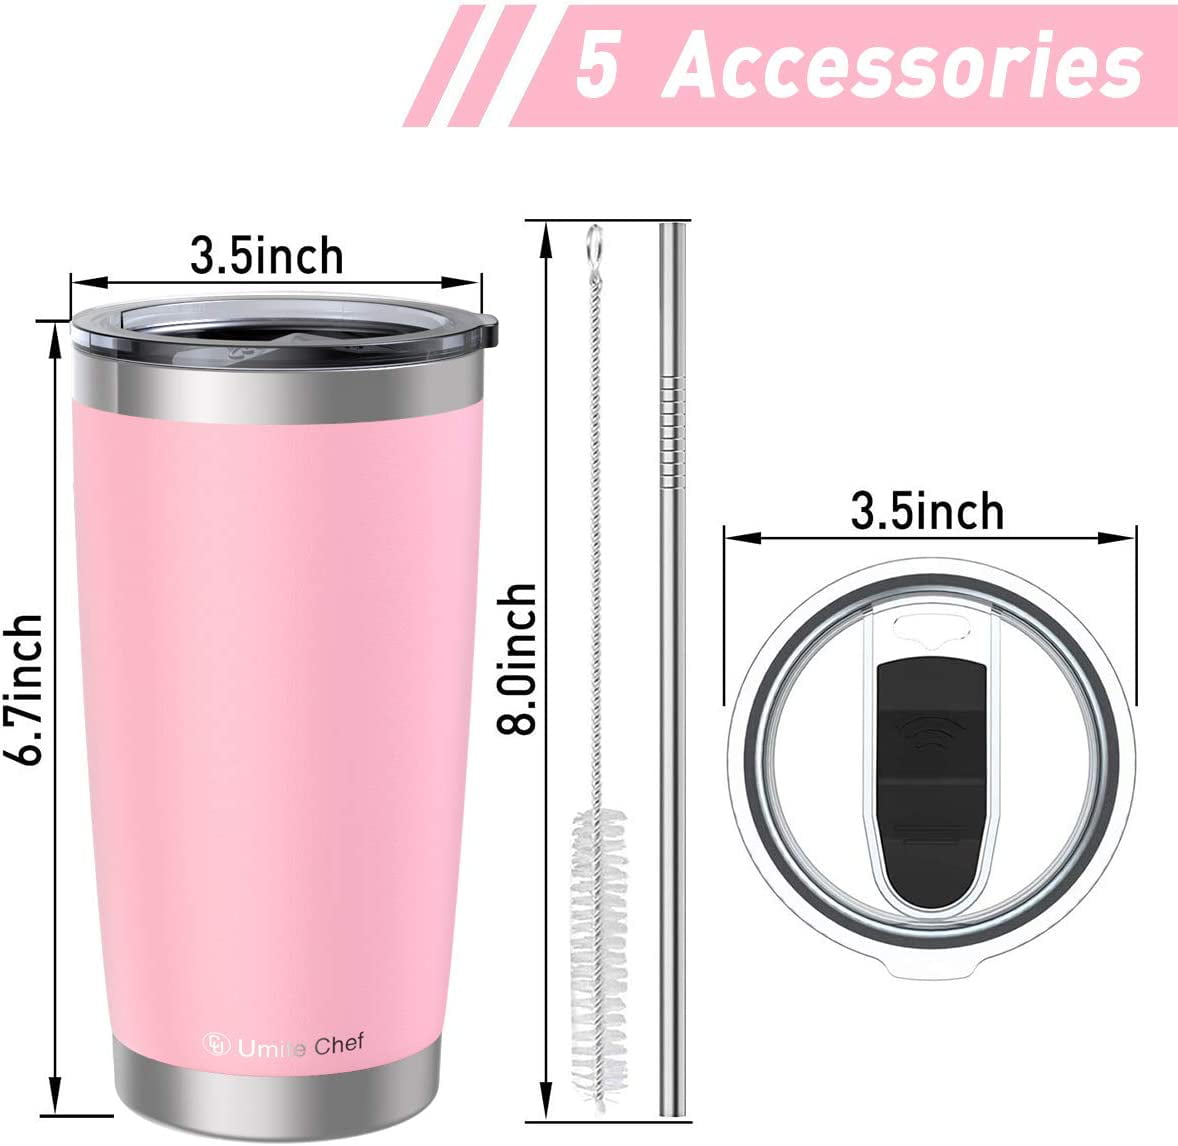 4 Pack 20oz Insulated Tumblers with Lid & Gift Box Black Double Wall Vacuum Insulated Travel Coffee Mug with Splash Proof slid lid Stainless Steel Coffee Cup by Umite Chef 